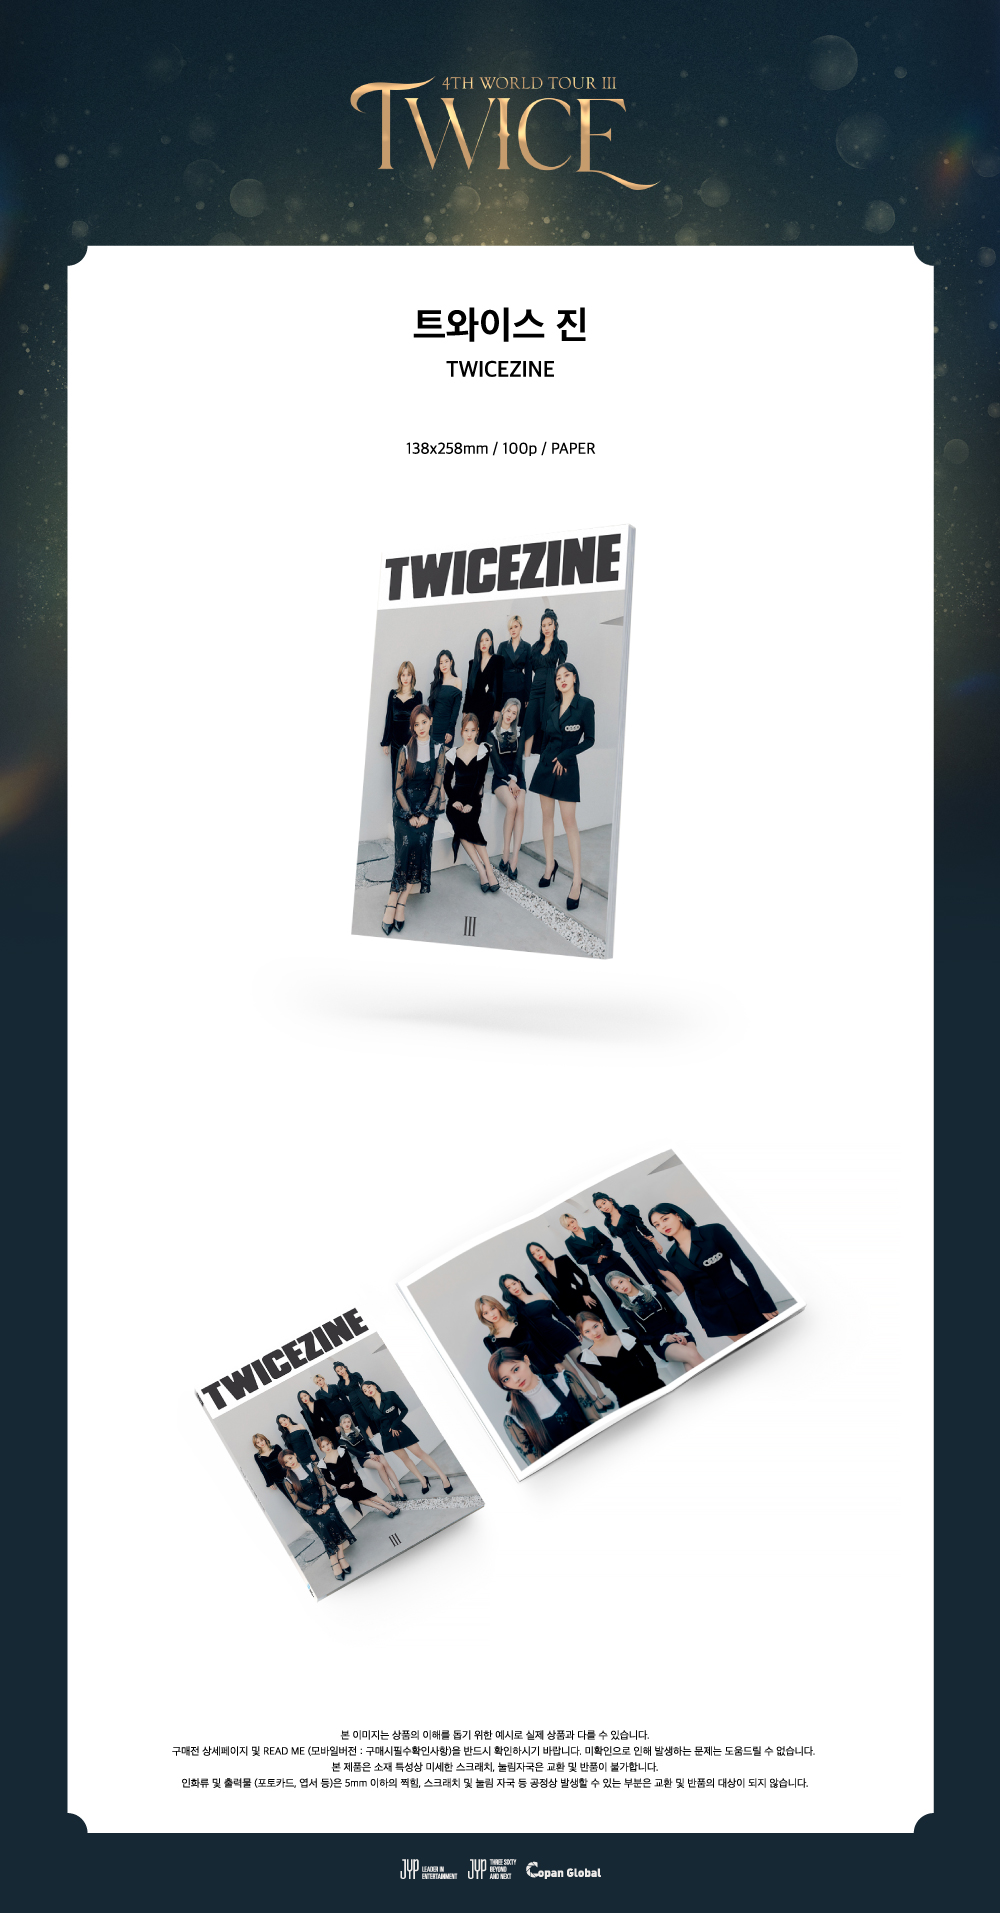 TWICE Merch from Their “4th World Tour III” Is Now Available Online for a  Limited Time